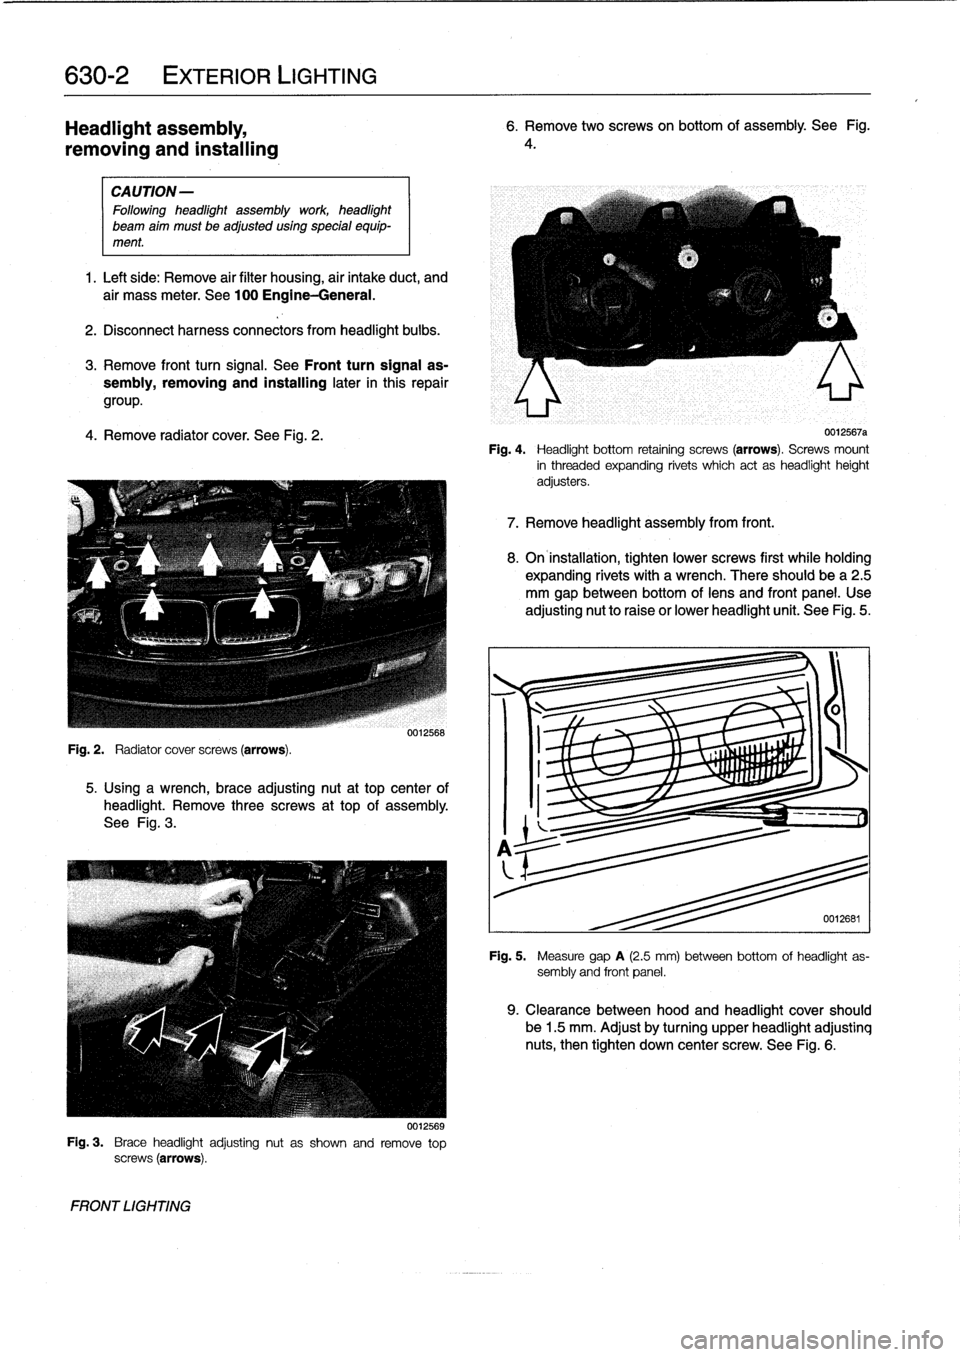 BMW 318i 1998 E36 Owners Manual 
630-2

	

EXTERIOR
LIGHTING

Headlight
assembly,

removing
and
installing

CAUTION-

Followingheadlight
assembly
work
headlight

beam
aim
must
be
adjusted
using
special
equip-
ment
.

1
.
Left
side
: